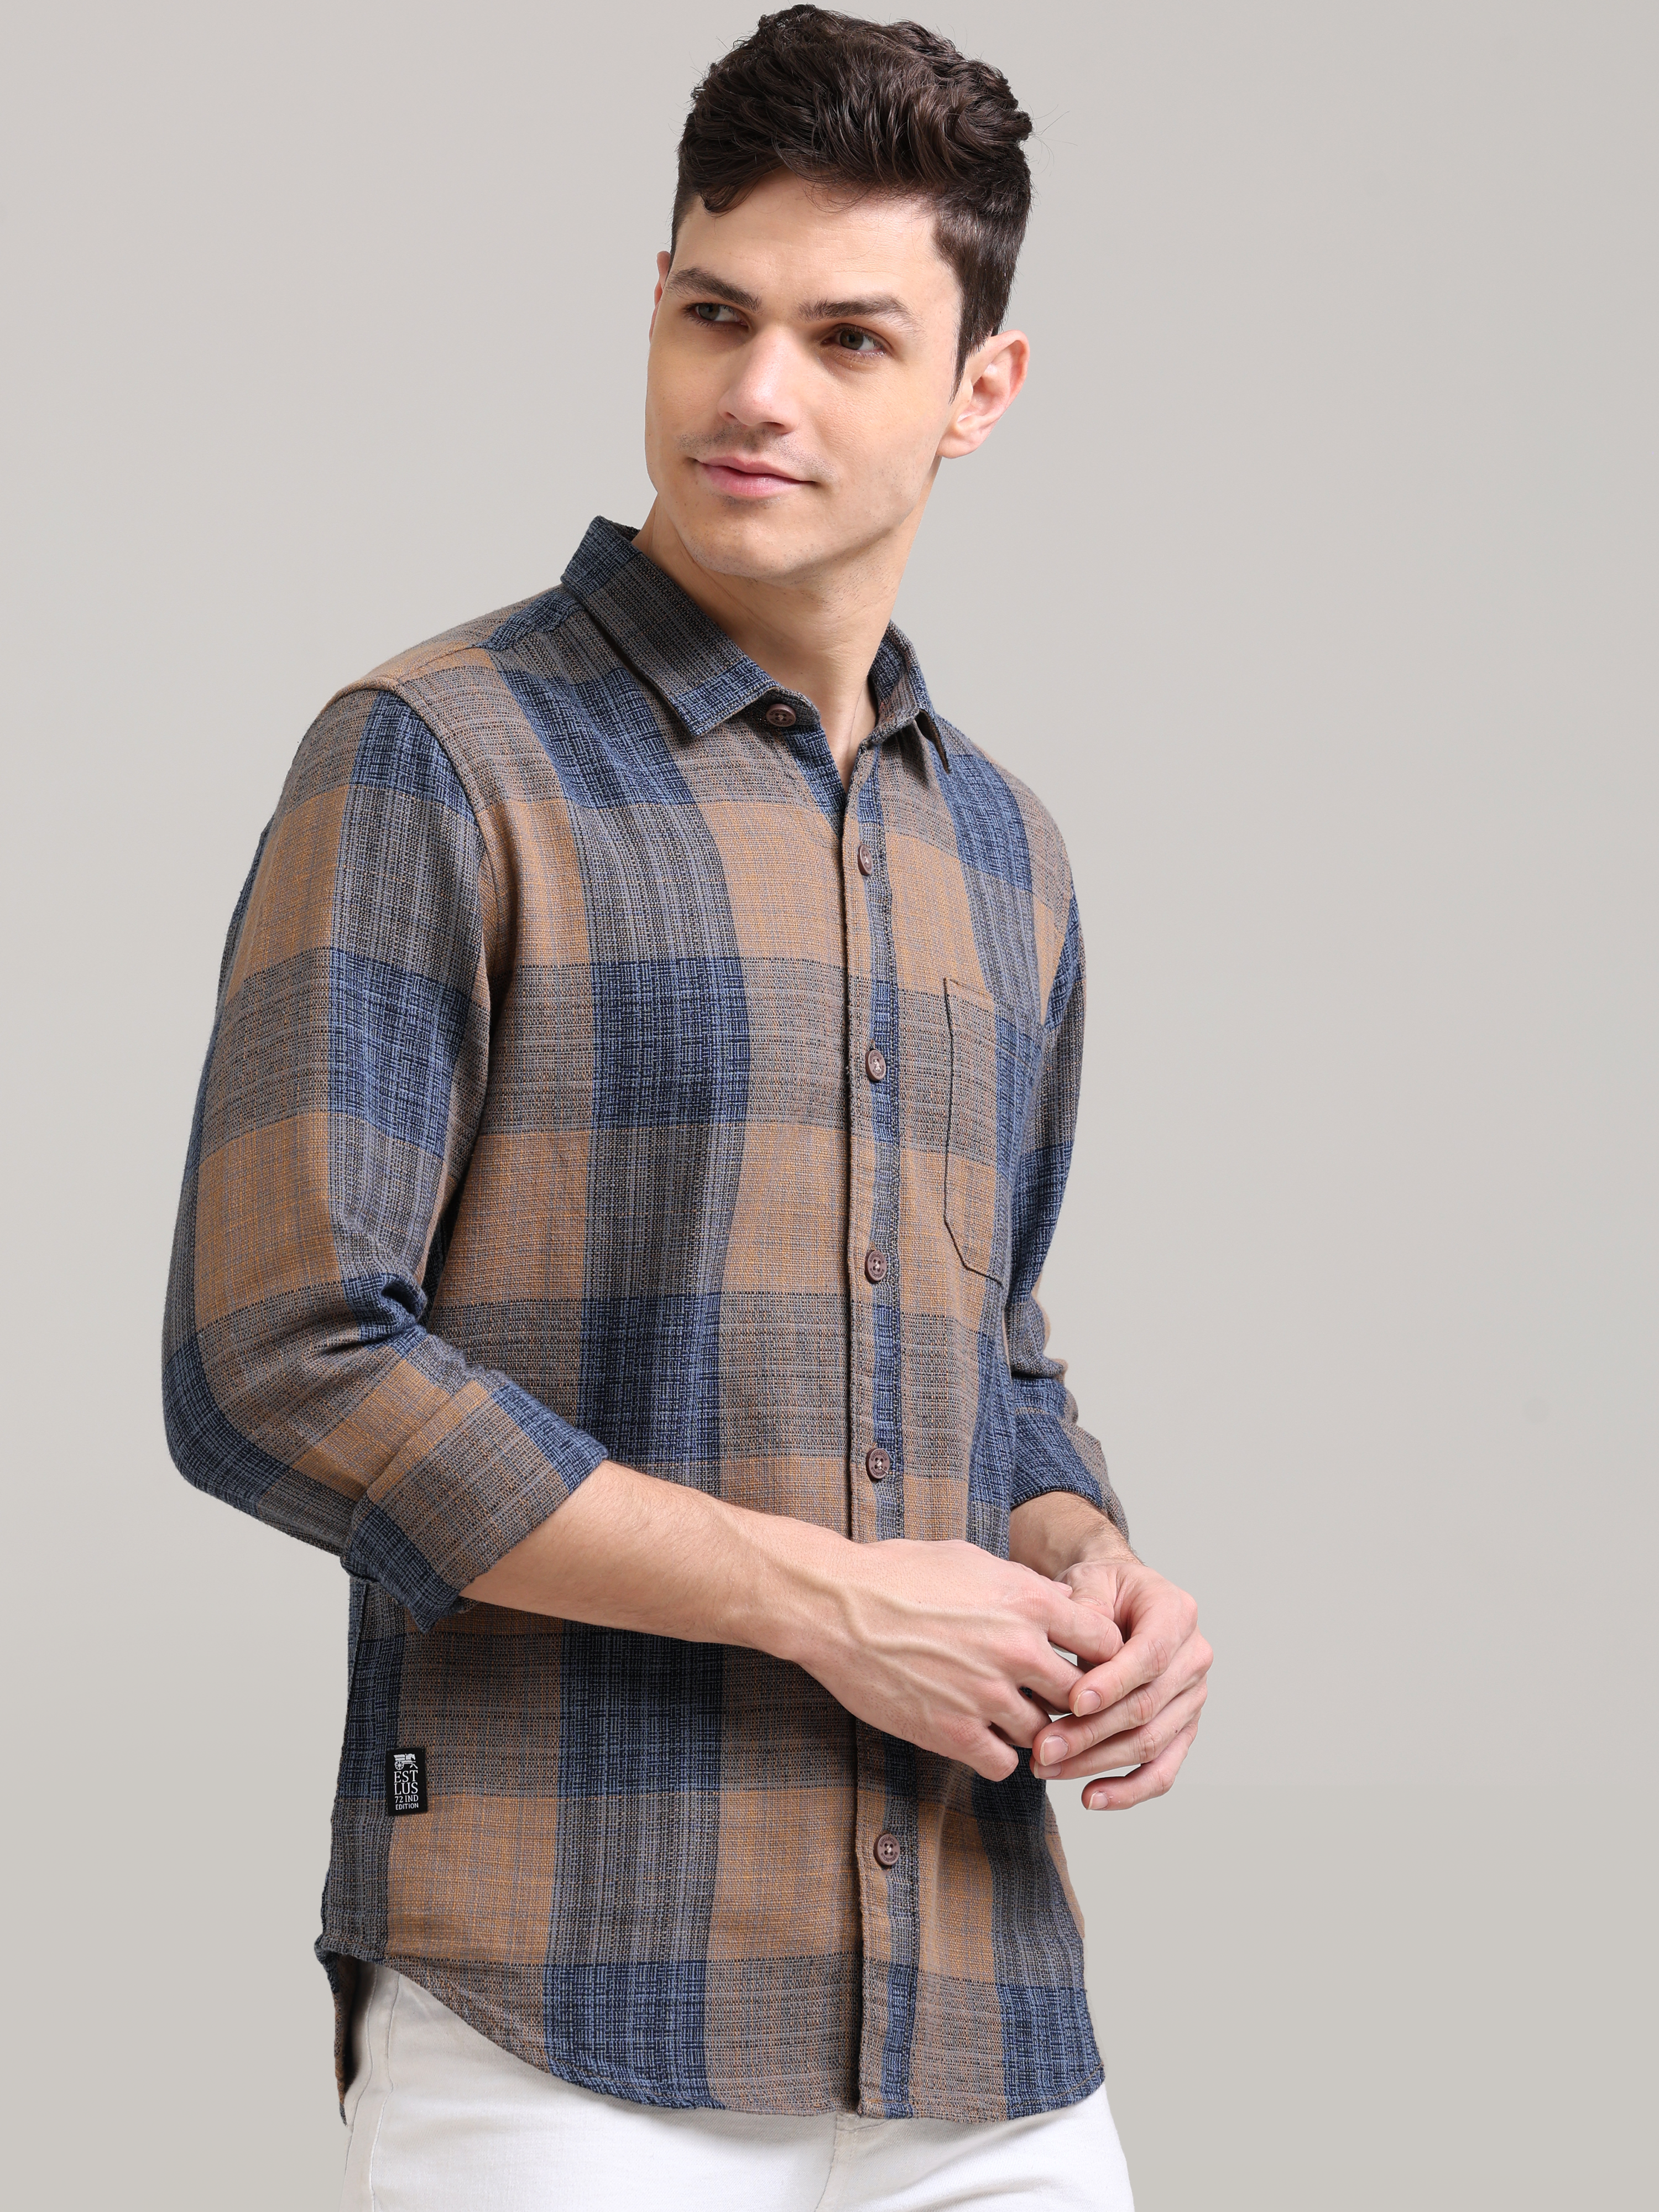 Beep Sea blue Casual Check Shirt shop online at Estilocus. 100% Cotton • Full-sleeve check shirt• Cut and sew placket• Regular collar• Double button edge cuff• Single pocket • Curved bottom hemline .• All double needle construction, finest quality sewing•